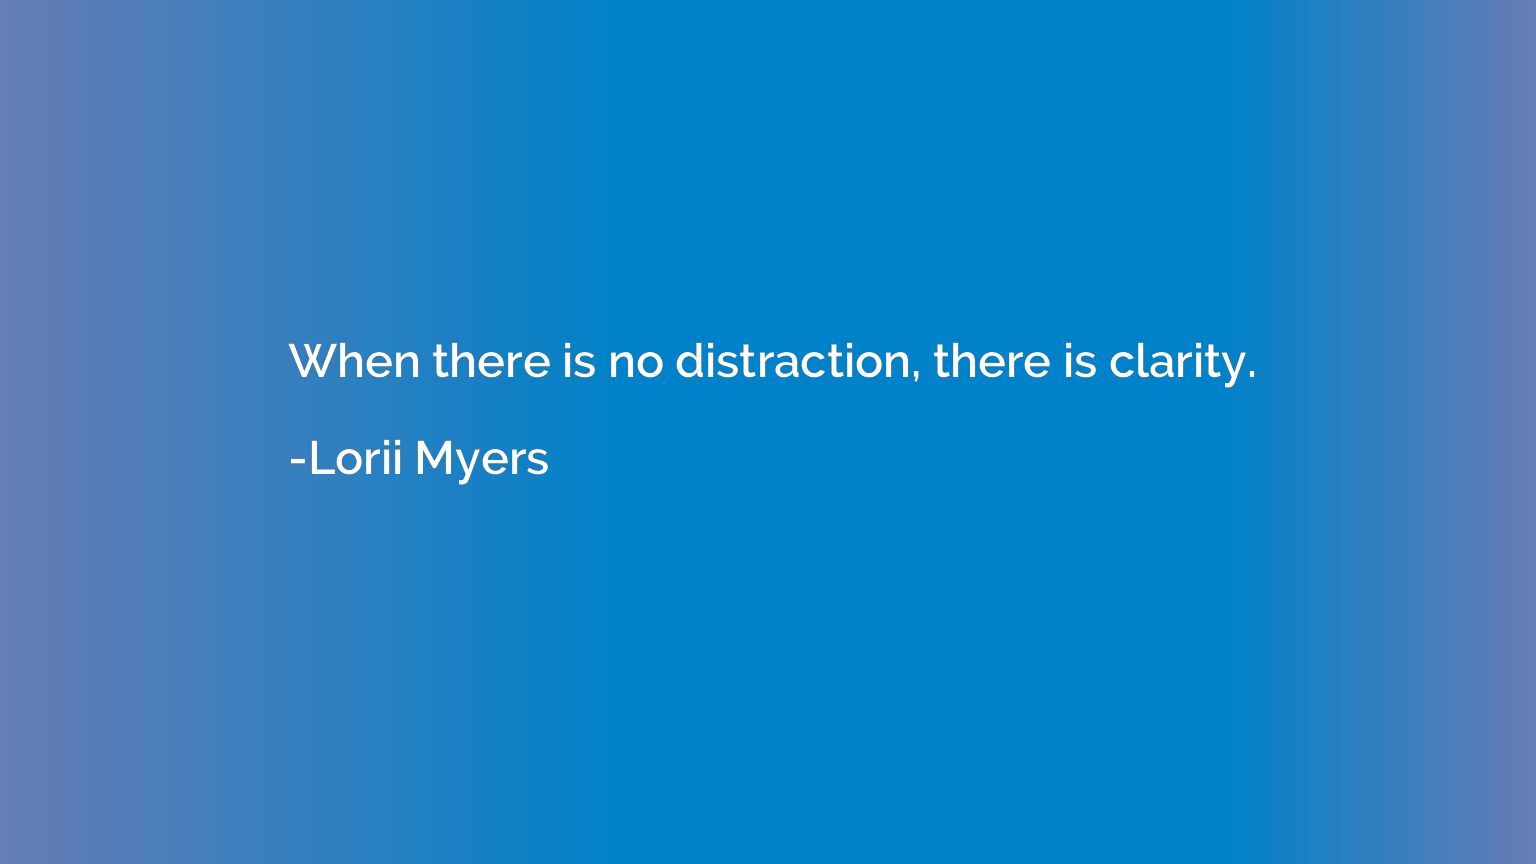 When there is no distraction, there is clarity.